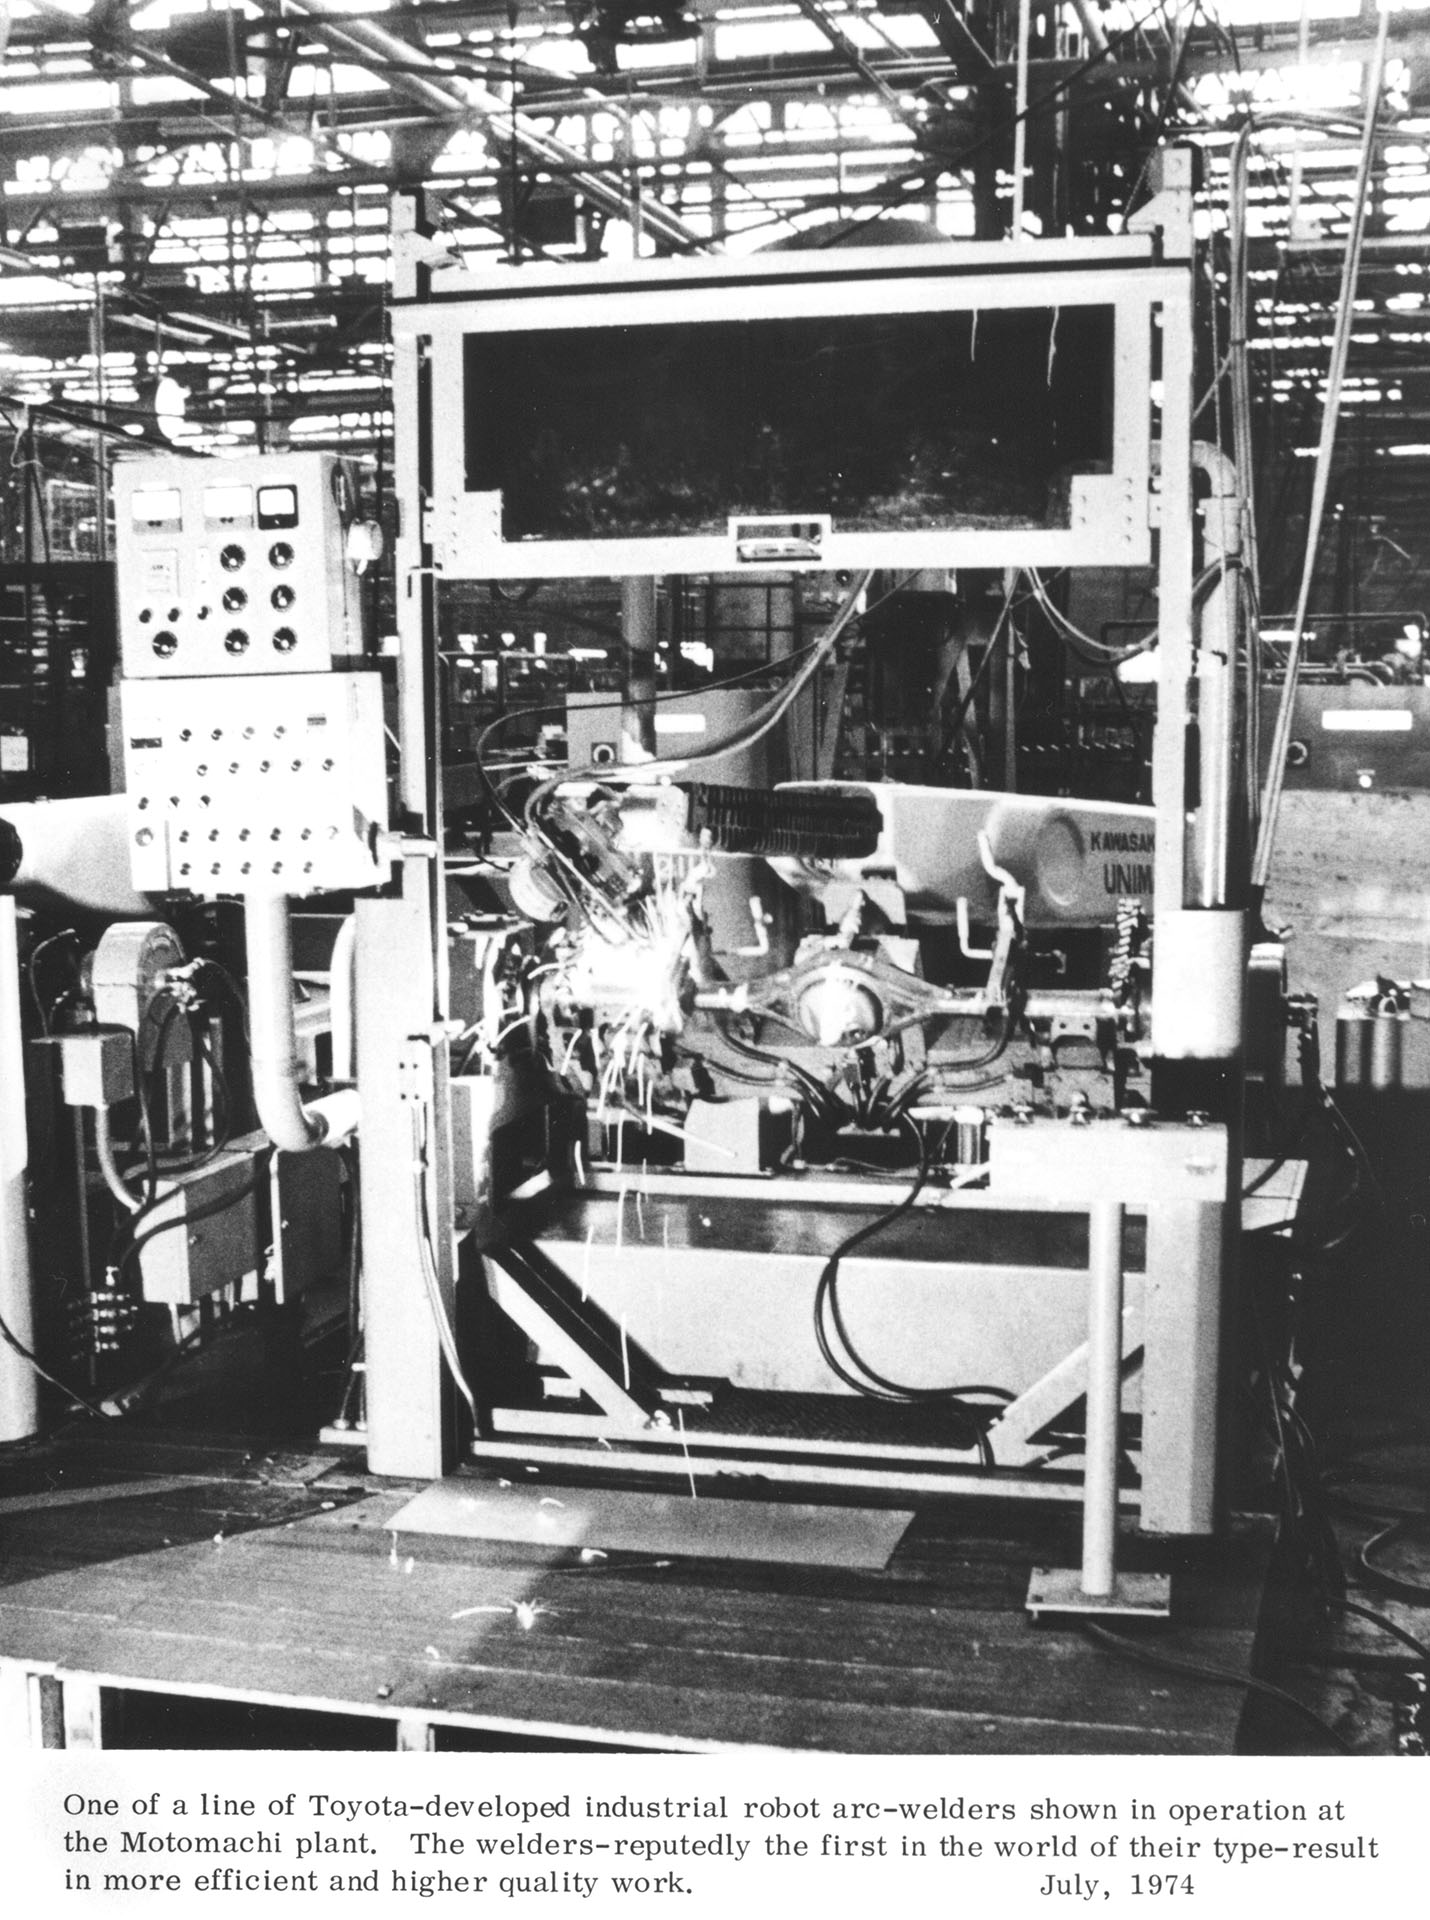 One of a line of Toyota-developed industrial robot arc-welders shown in operation at the Motomachi plant. The welders-reputedly the first in the world of their type-result in more efficient and higher quality work.